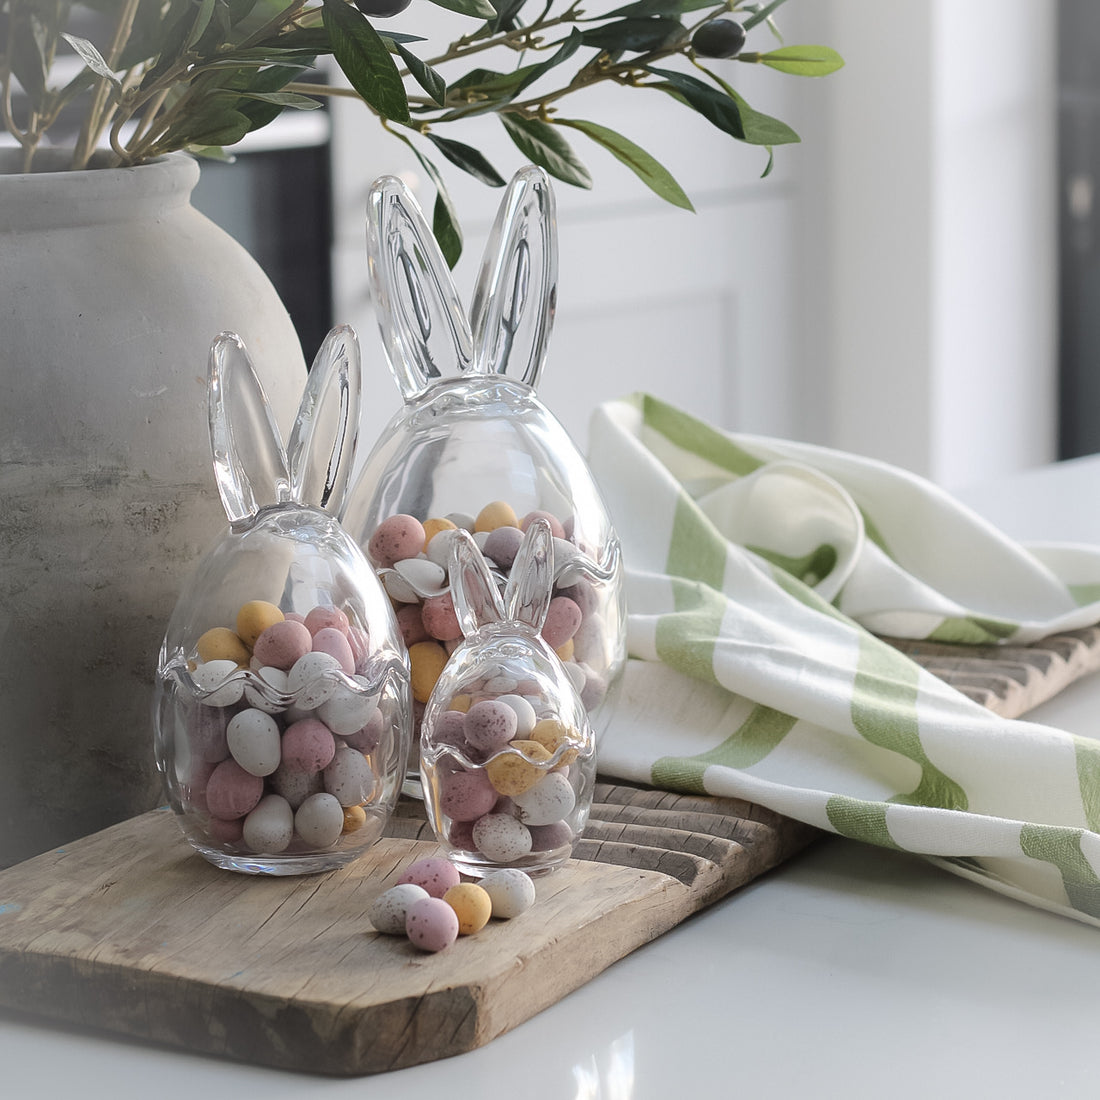 Glass bunny ears jars, filled with mini eggs on top of wooden board